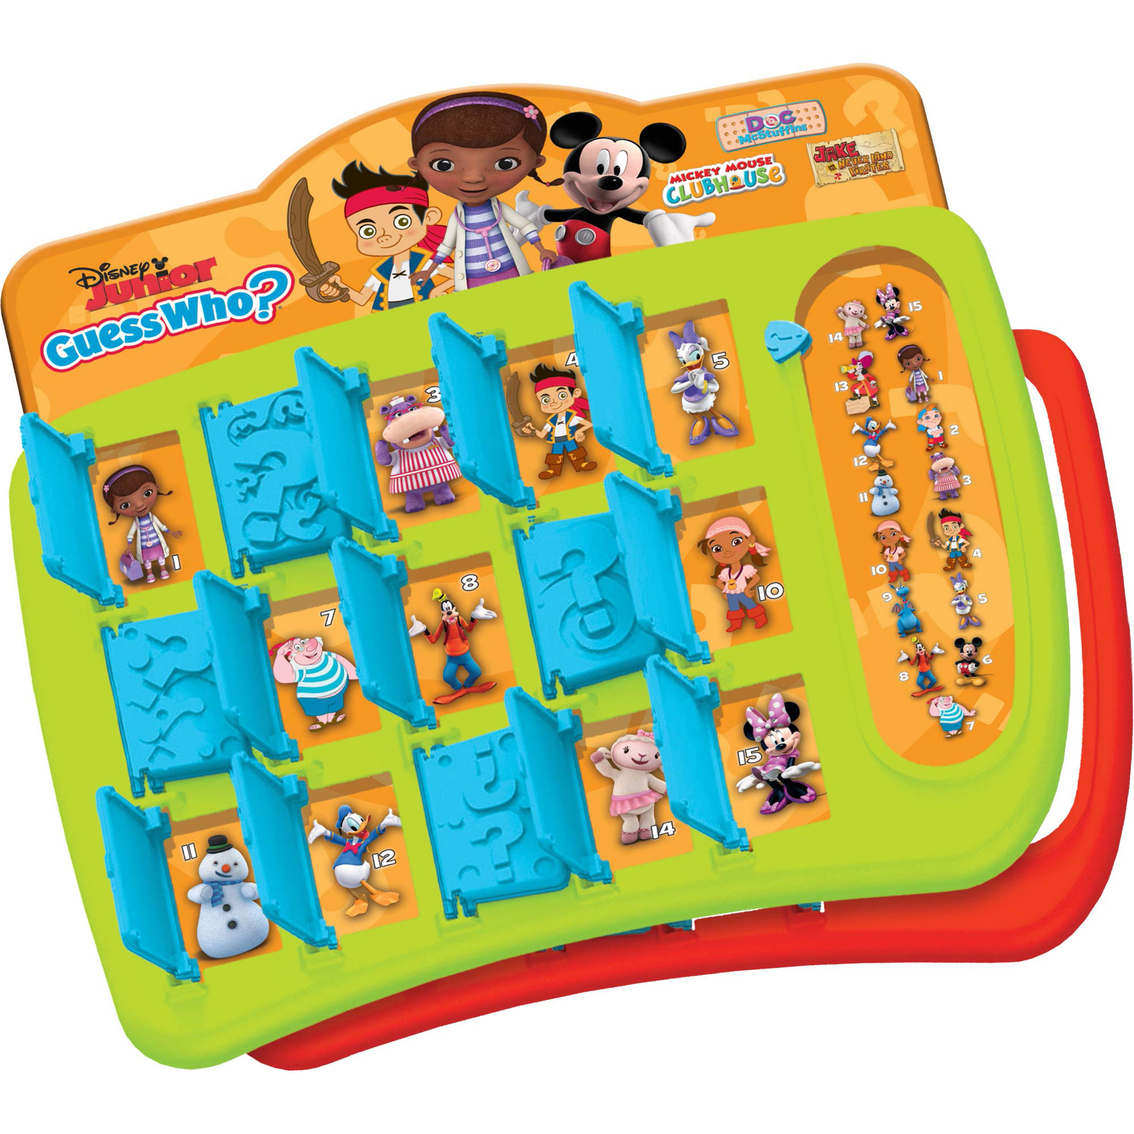 Disney Junior Guess Who? Learning & Development Baby